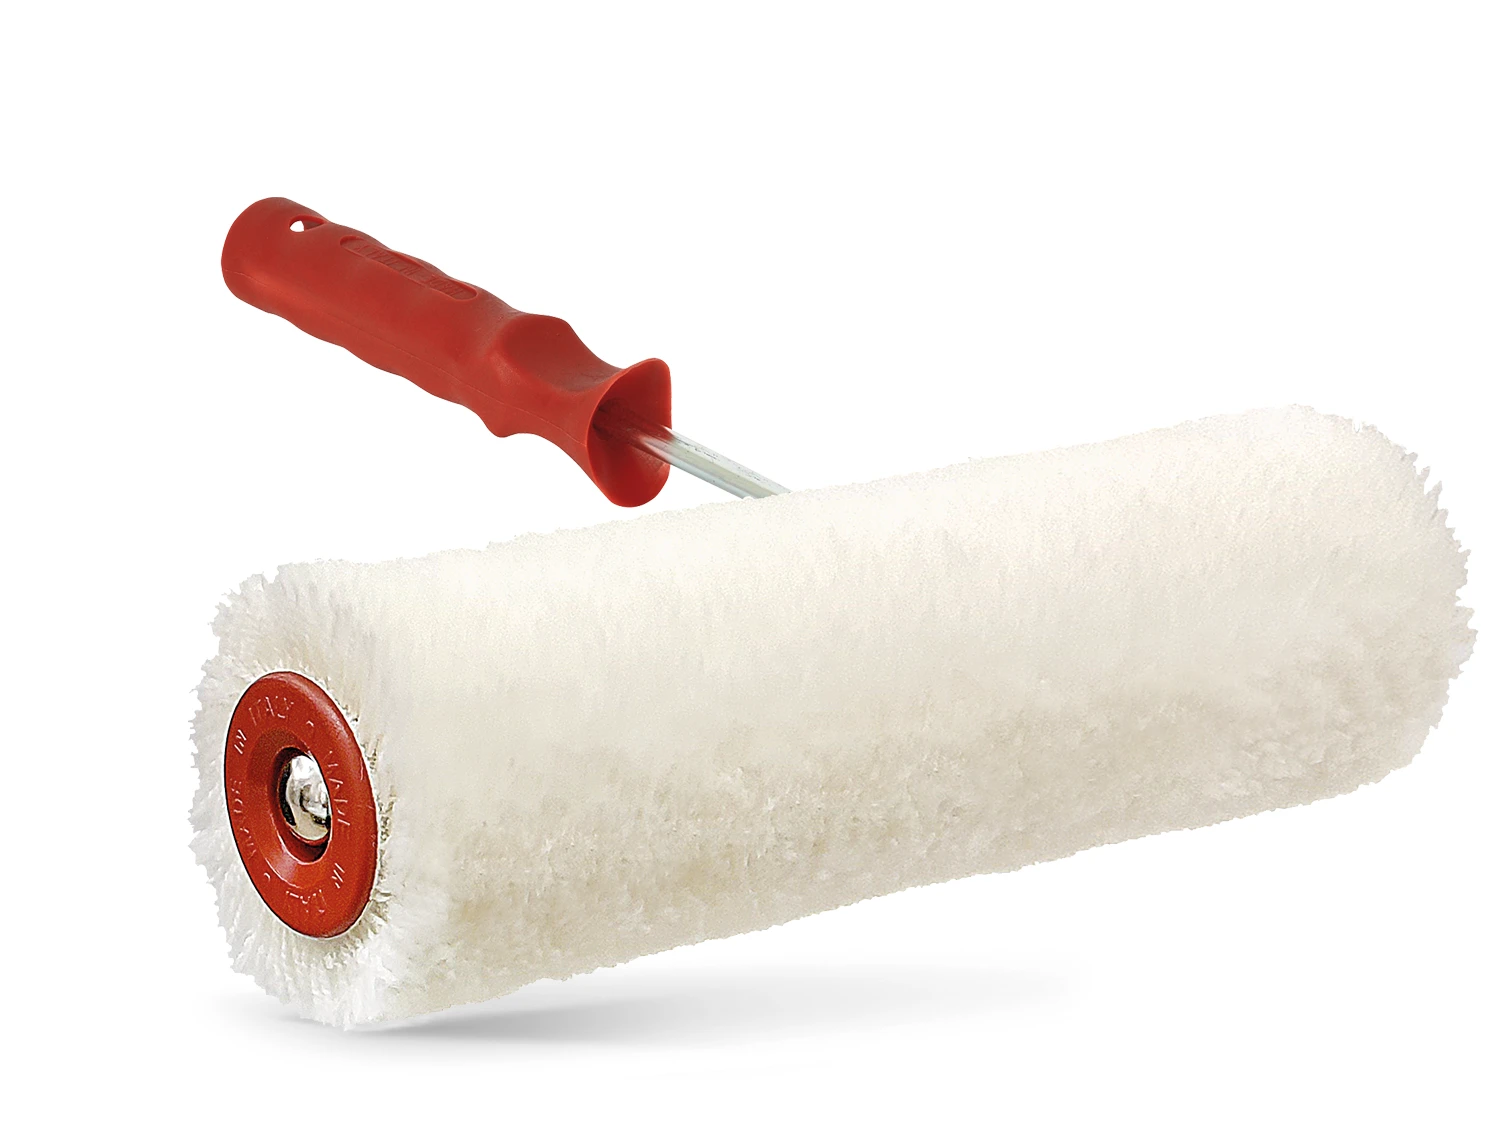 A11 – TWISTED ACRYLIC PAINT ROLLER